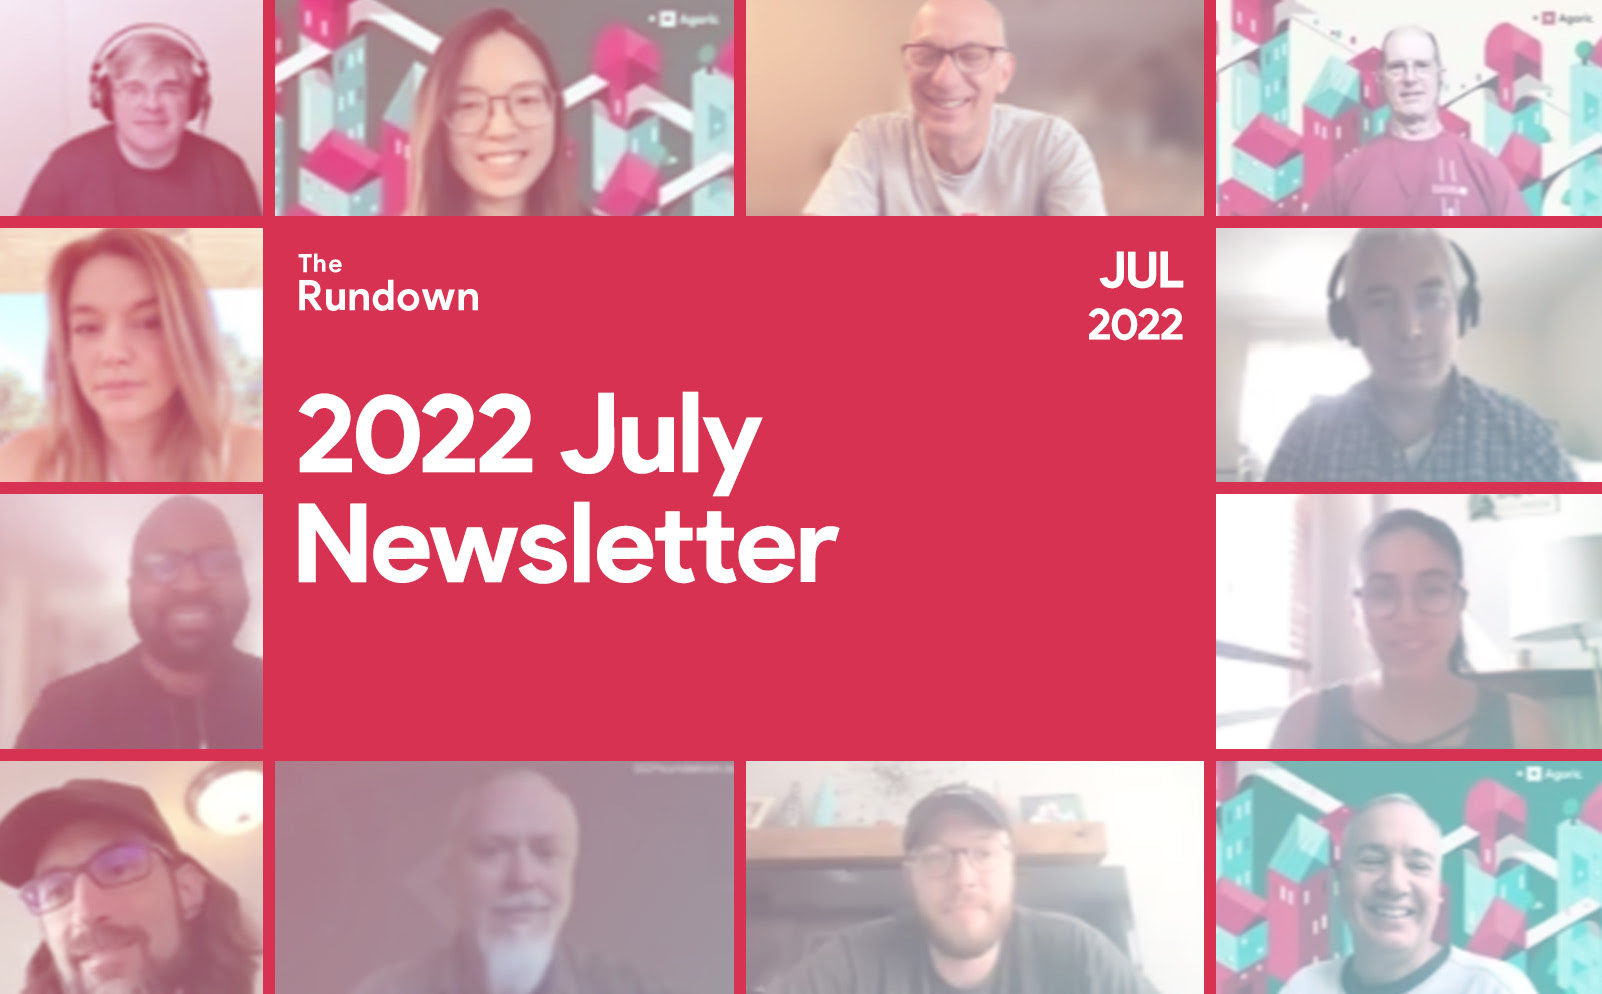 July 2022 Newsletter: Staking Rewards, Unlocked BLD, and More